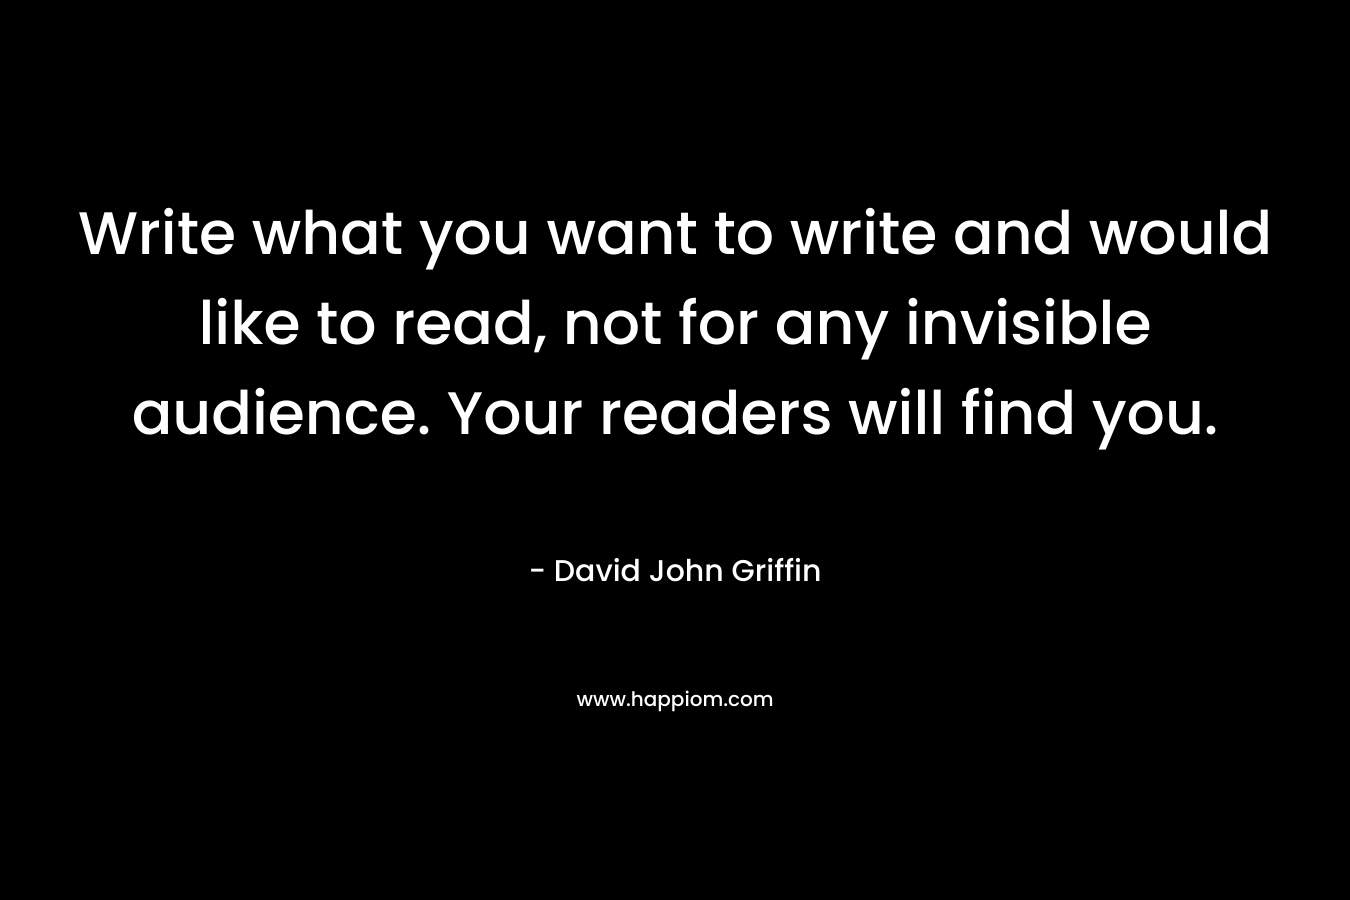 Write what you want to write and would like to read, not for any invisible audience. Your readers will find you.